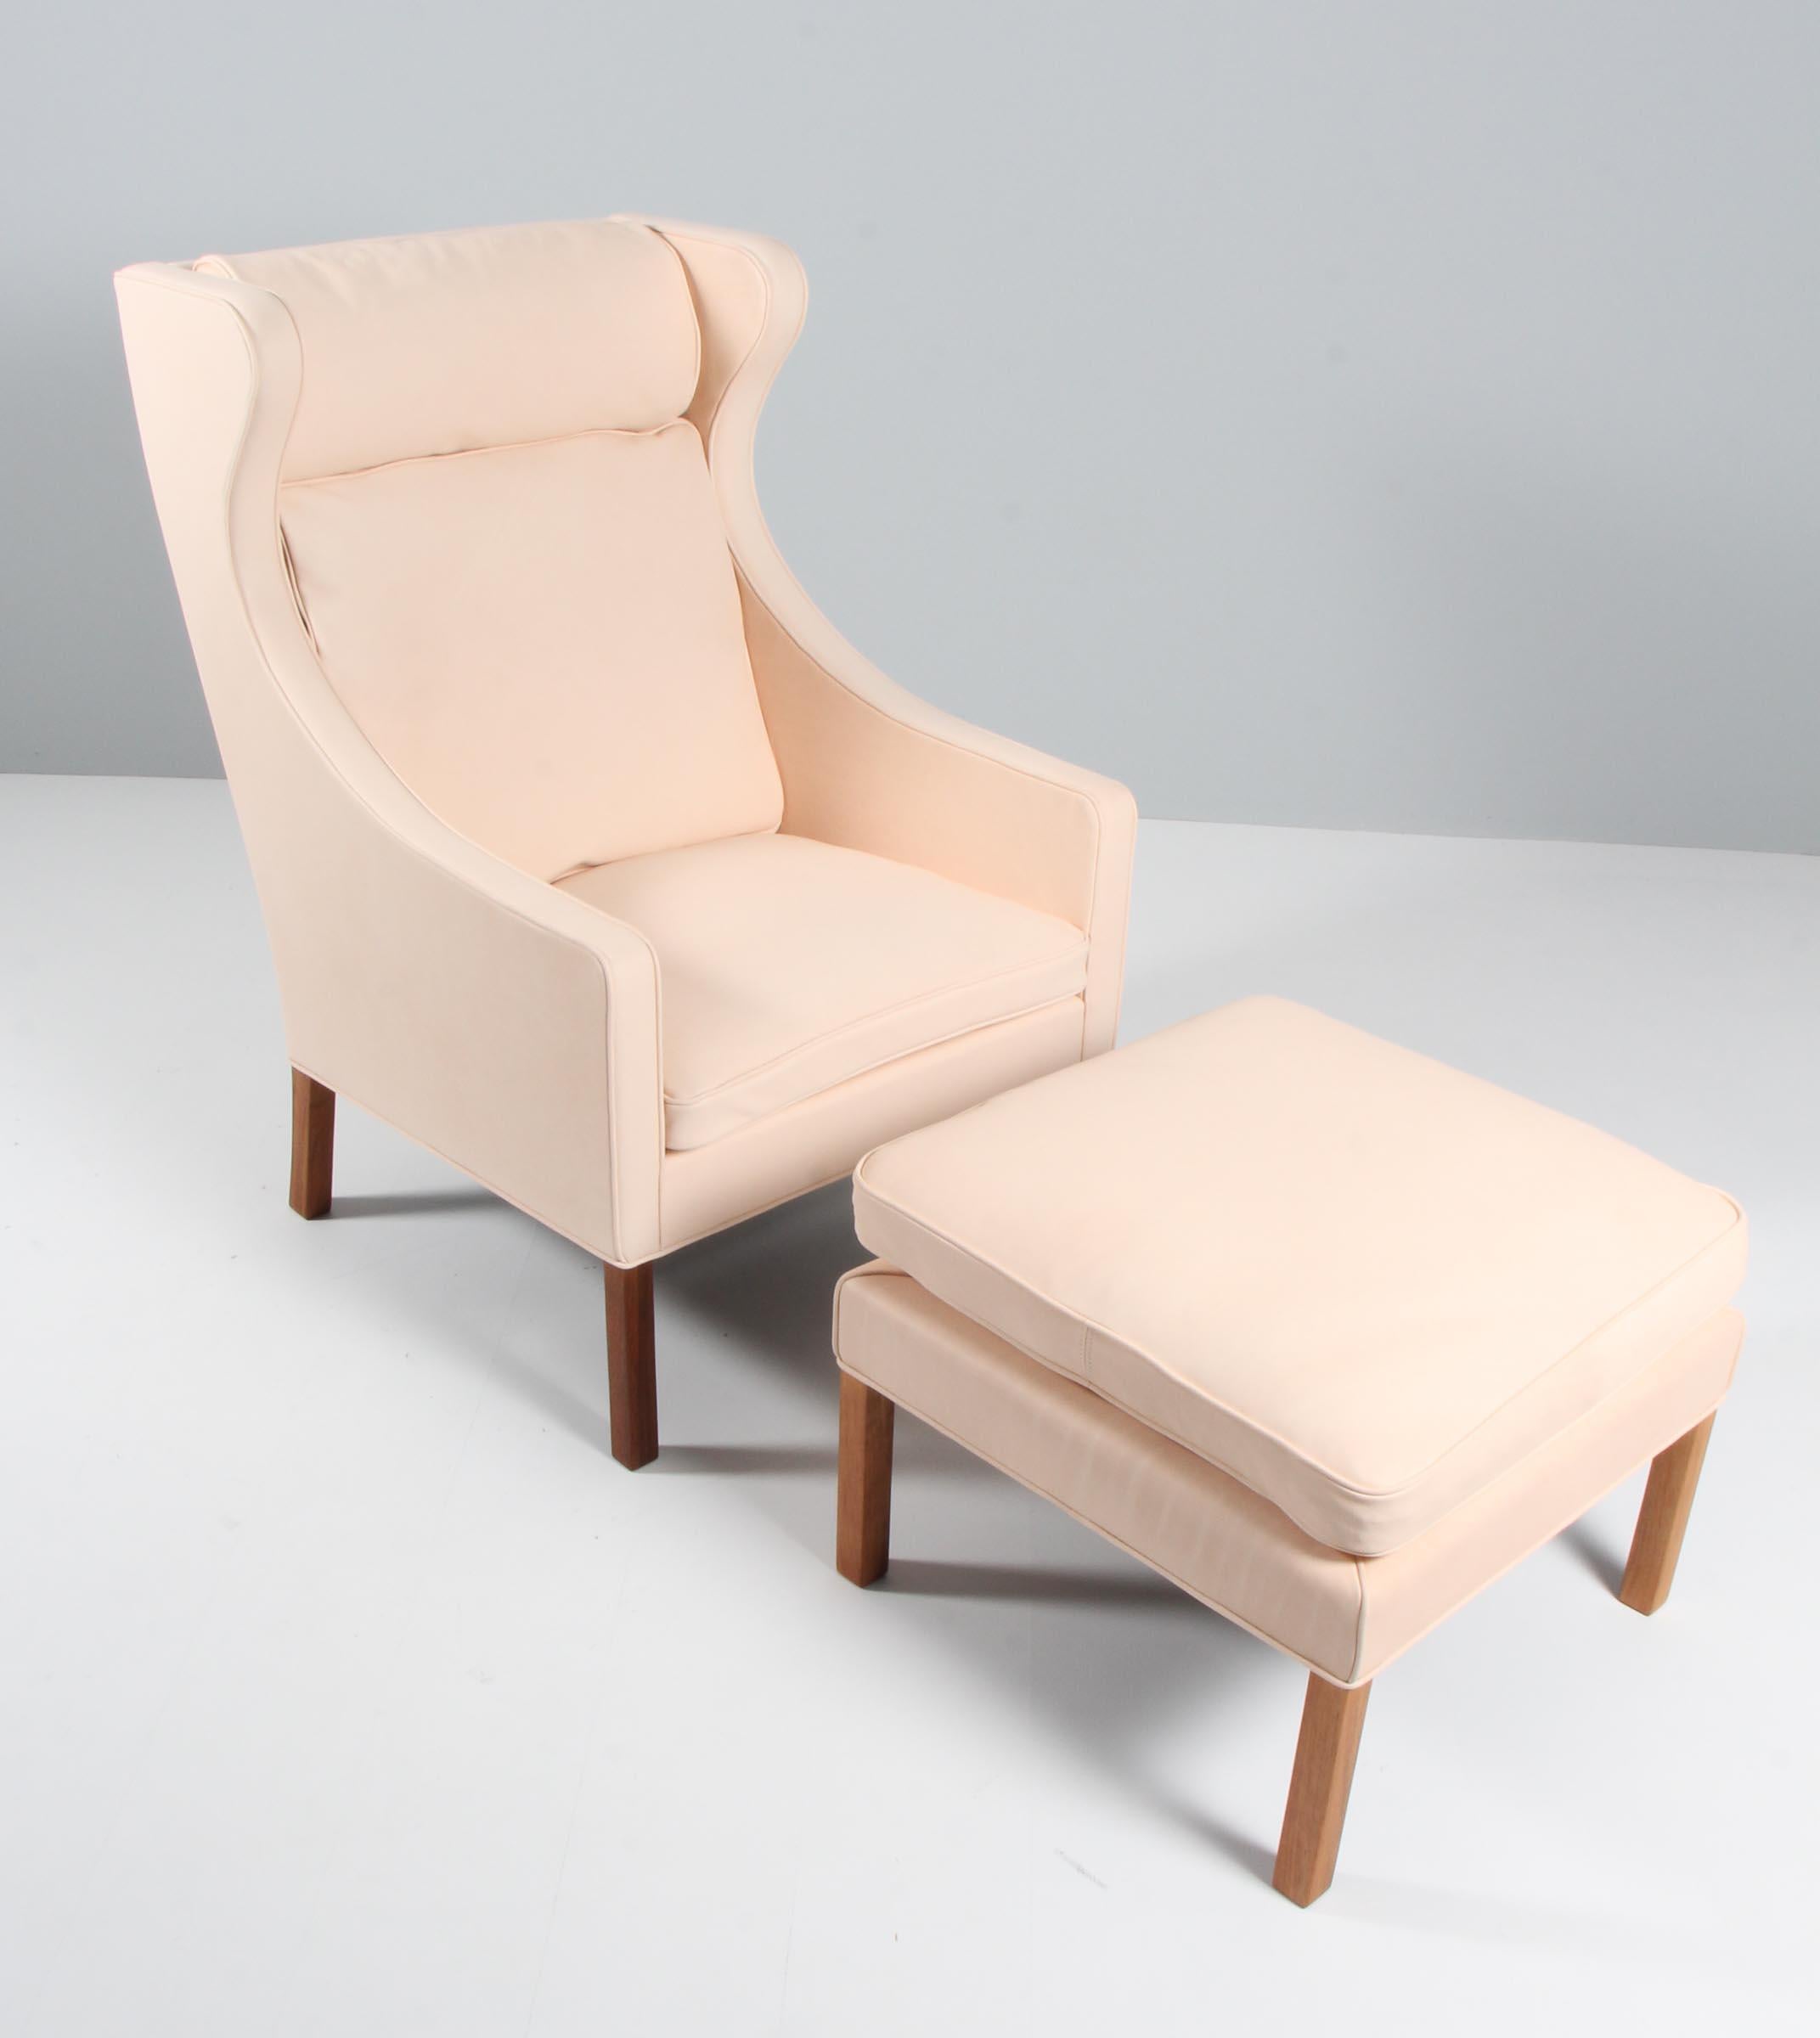 Børge Mogensen wingback chair with ottoman new upholstered with vegetable nature leather.

Legs in teak.

Model 2204 + 2292, made by Fredericia Furniture.